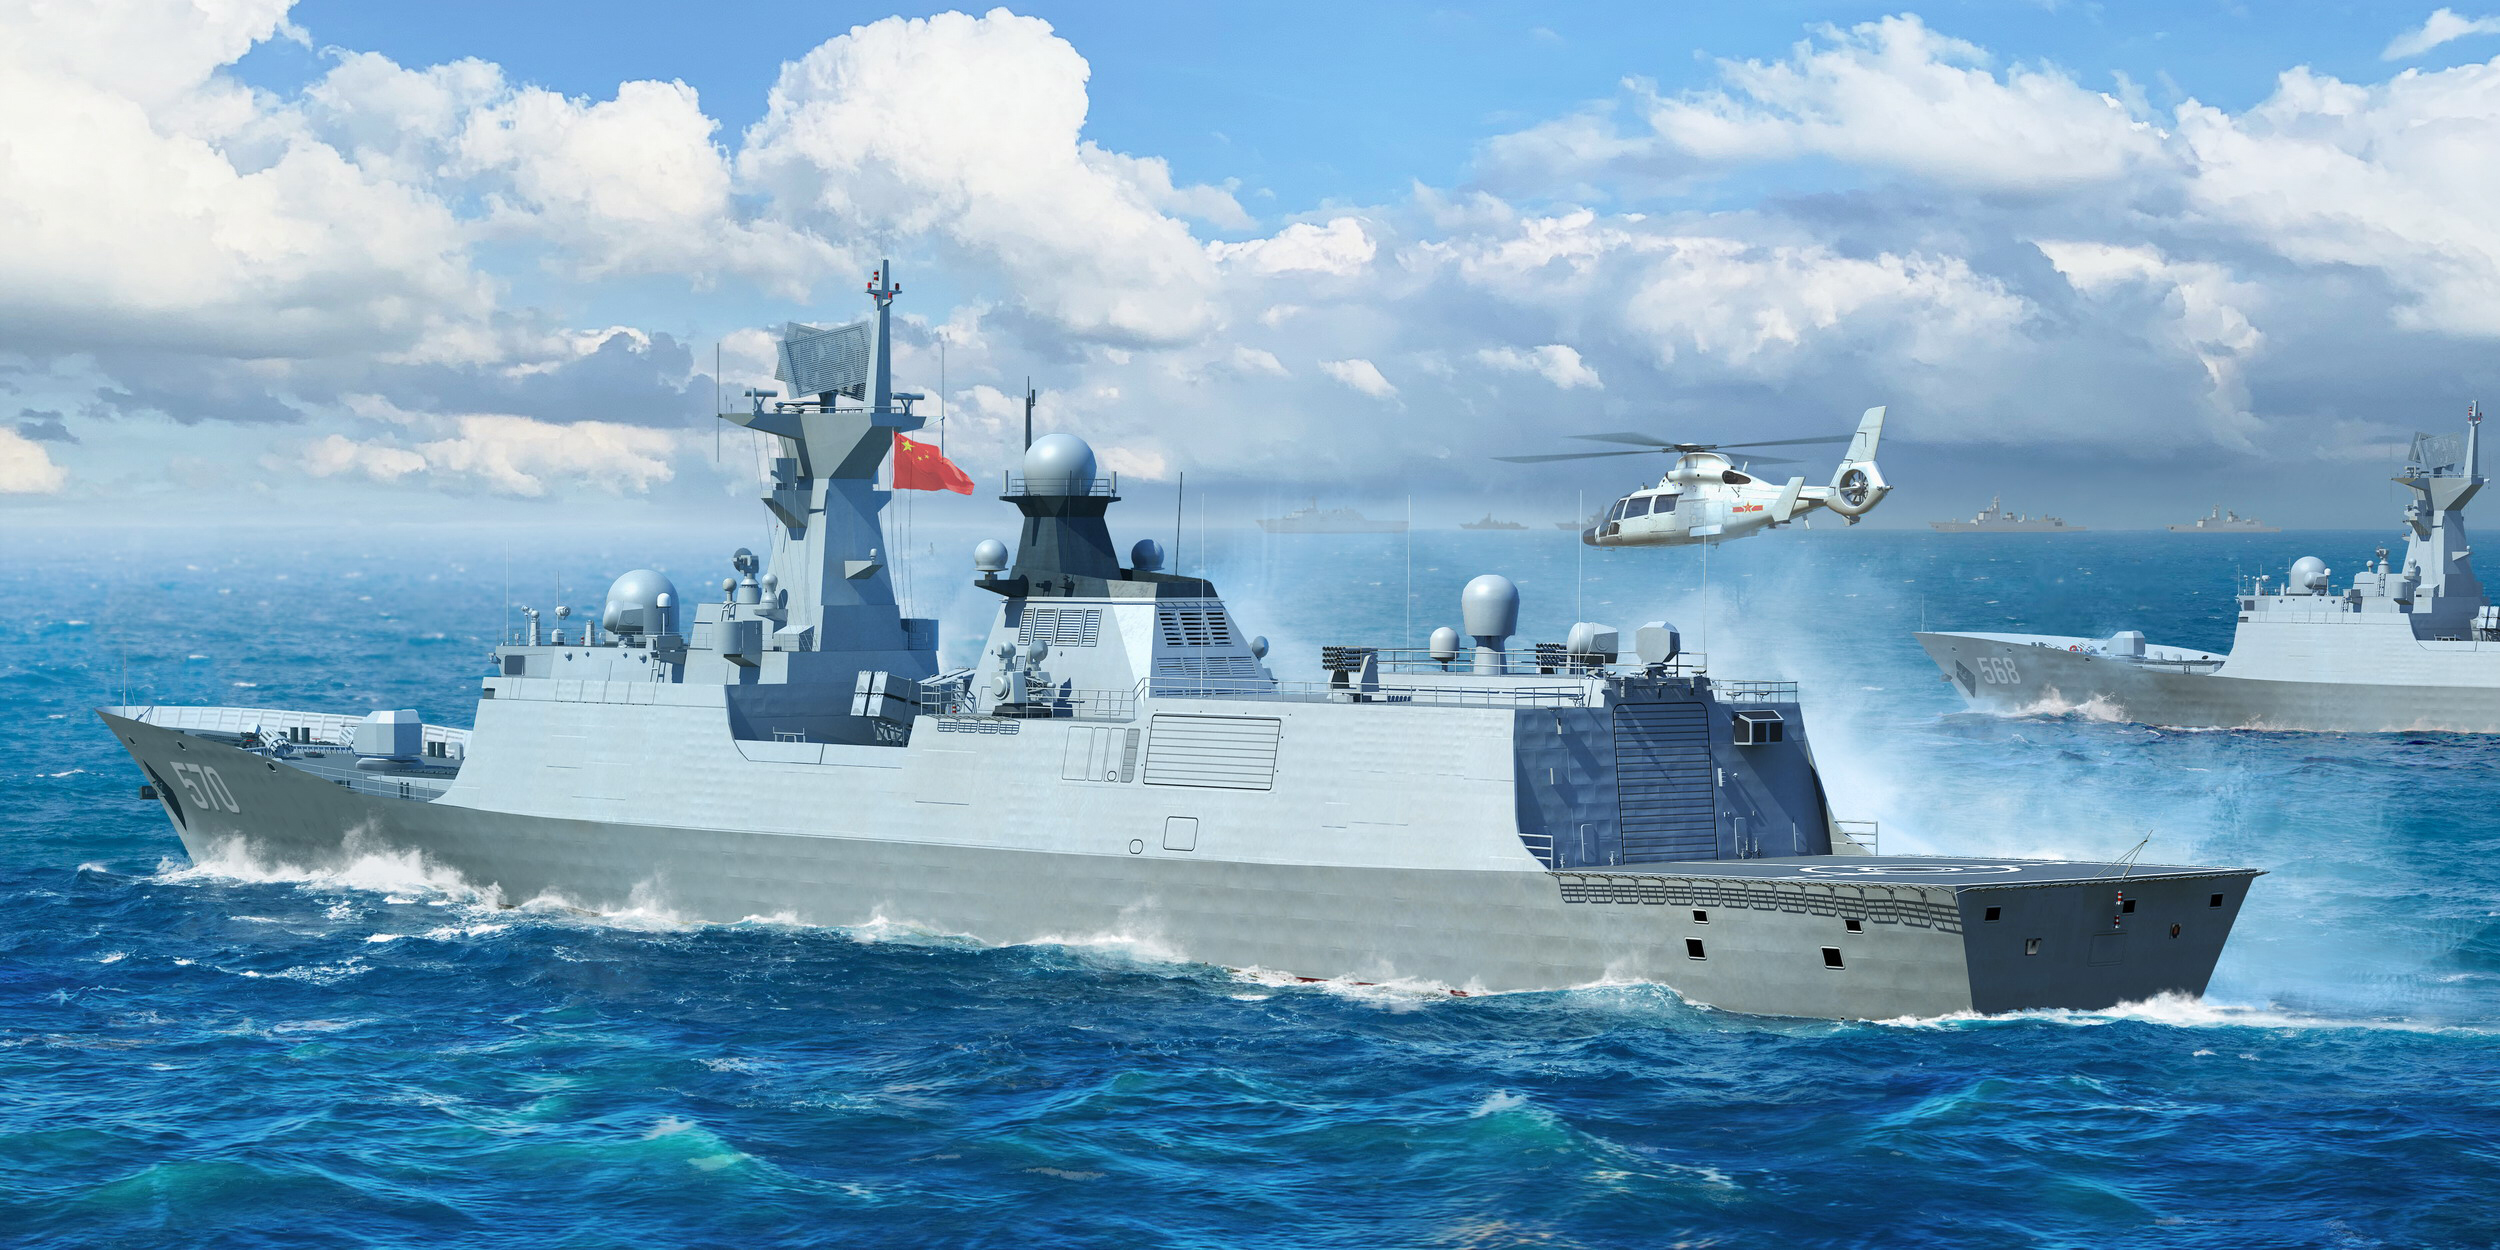 PLA NAVY Water Boat Clouds Sky Aircraft Military Vehicle Waves Sea Warship 054A 2500x1250